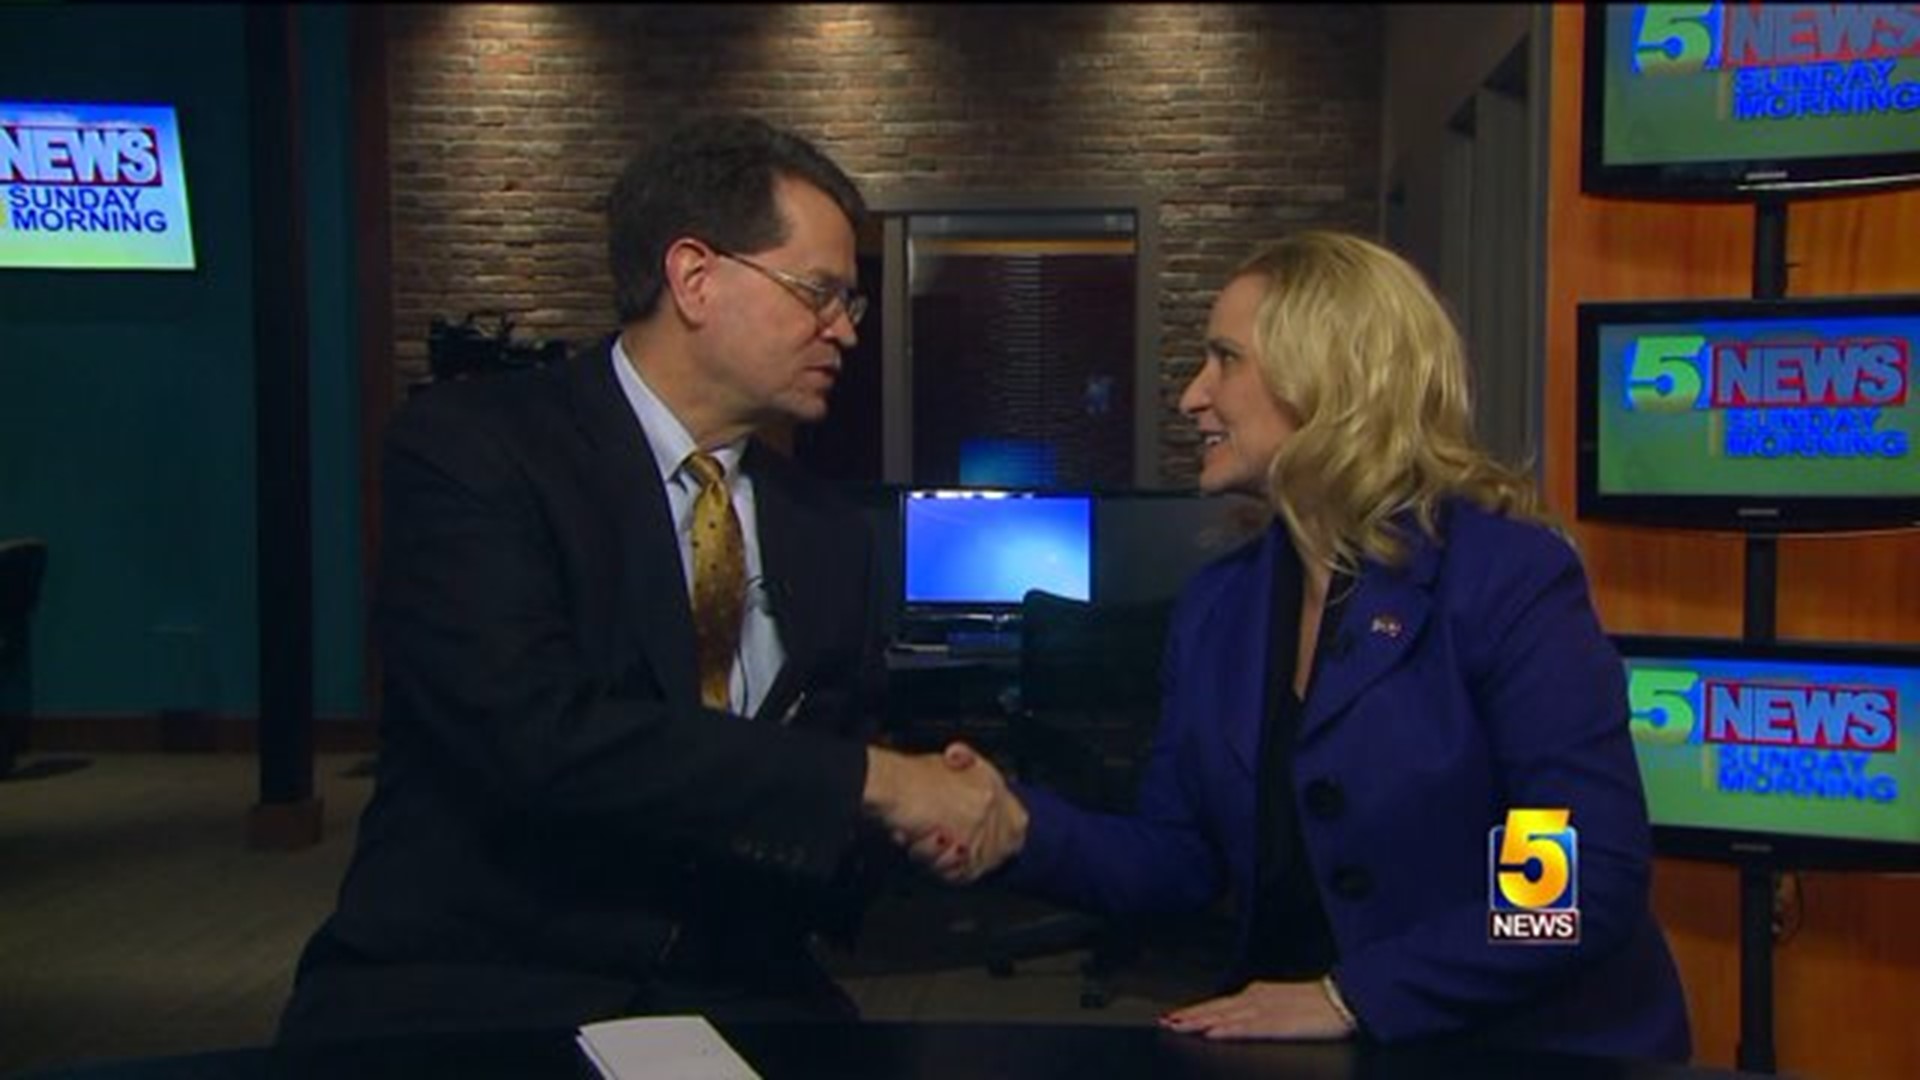 New Arkansas Attorney General Speaks On Issues